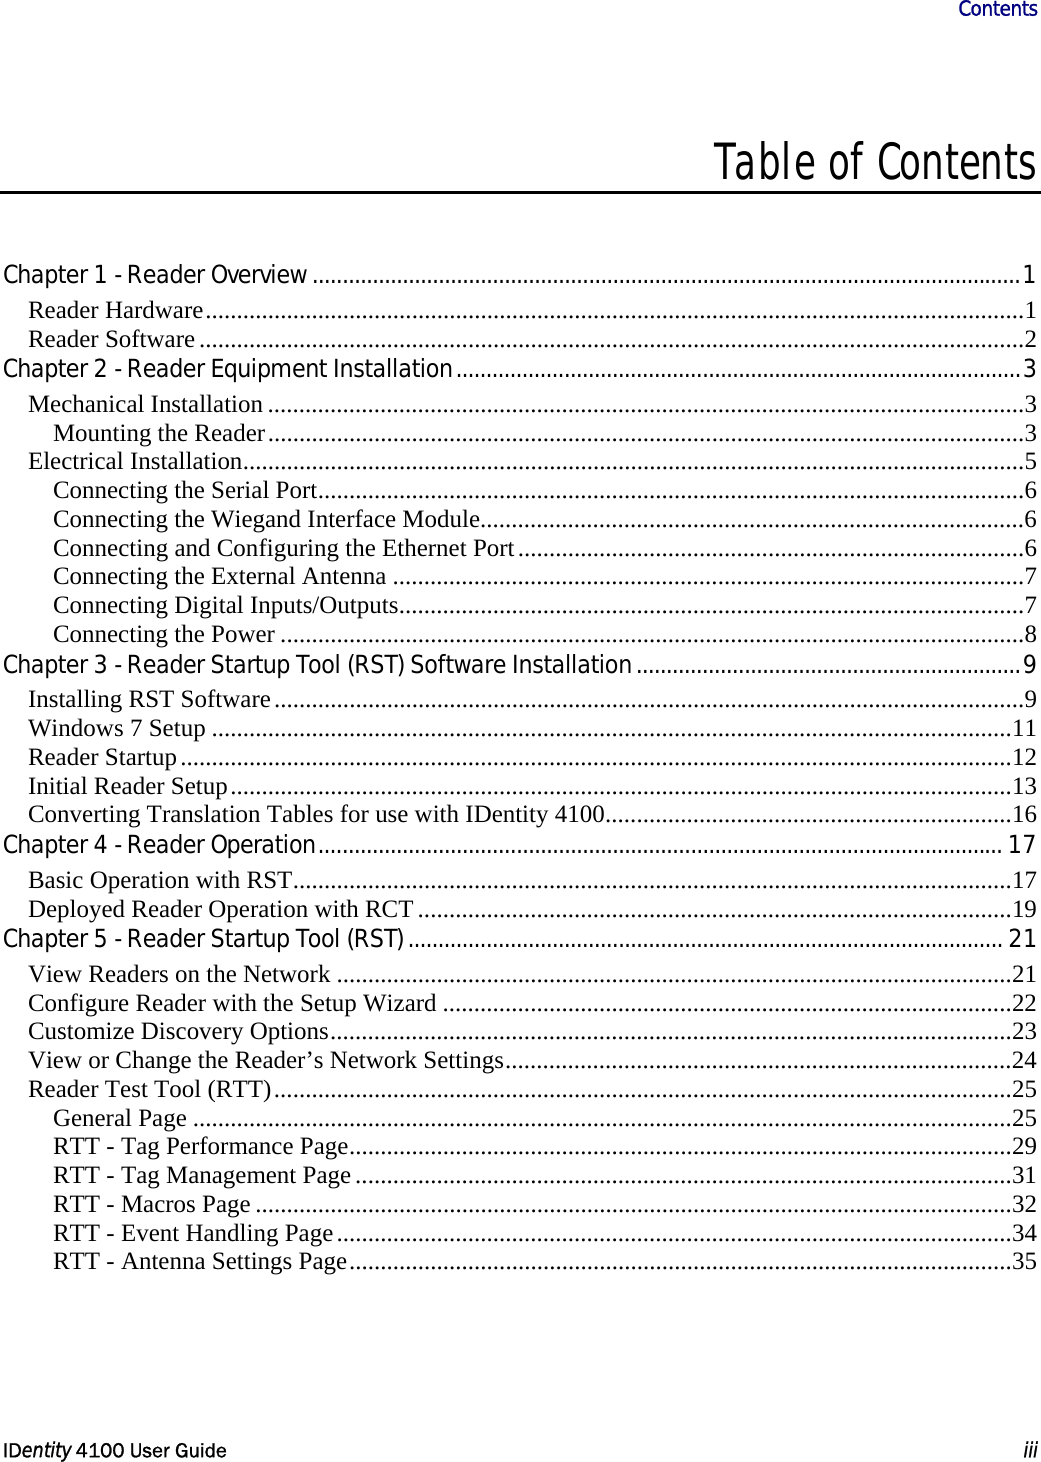                      Contents   IDentity 4100 User Guide  iii  Table of Contents   Chapter 1 - Reader Overview......................................................................................................................1 Reader Hardware...................................................................................................................................1 Reader Software....................................................................................................................................2 Chapter 2 - Reader Equipment Installation..............................................................................................3 Mechanical Installation .........................................................................................................................3 Mounting the Reader.........................................................................................................................3 Electrical Installation.............................................................................................................................5 Connecting the Serial Port.................................................................................................................6 Connecting the Wiegand Interface Module.......................................................................................6 Connecting and Configuring the Ethernet Port.................................................................................6 Connecting the External Antenna .....................................................................................................7 Connecting Digital Inputs/Outputs....................................................................................................7 Connecting the Power .......................................................................................................................8 Chapter 3 - Reader Startup Tool (RST) Software Installation................................................................9 Installing RST Software........................................................................................................................9 Windows 7 Setup ................................................................................................................................11 Reader Startup.....................................................................................................................................12 Initial Reader Setup.............................................................................................................................13 Converting Translation Tables for use with IDentity 4100.................................................................16 Chapter 4 - Reader Operation.................................................................................................................. 17 Basic Operation with RST...................................................................................................................17 Deployed Reader Operation with RCT...............................................................................................19 Chapter 5 - Reader Startup Tool (RST)................................................................................................... 21 View Readers on the Network ............................................................................................................21 Configure Reader with the Setup Wizard ...........................................................................................22 Customize Discovery Options.............................................................................................................23 View or Change the Reader’s Network Settings.................................................................................24 Reader Test Tool (RTT)......................................................................................................................25 General Page ...................................................................................................................................25 RTT - Tag Performance Page..........................................................................................................29 RTT - Tag Management Page.........................................................................................................31 RTT - Macros Page .........................................................................................................................32 RTT - Event Handling Page............................................................................................................34 RTT - Antenna Settings Page..........................................................................................................35 